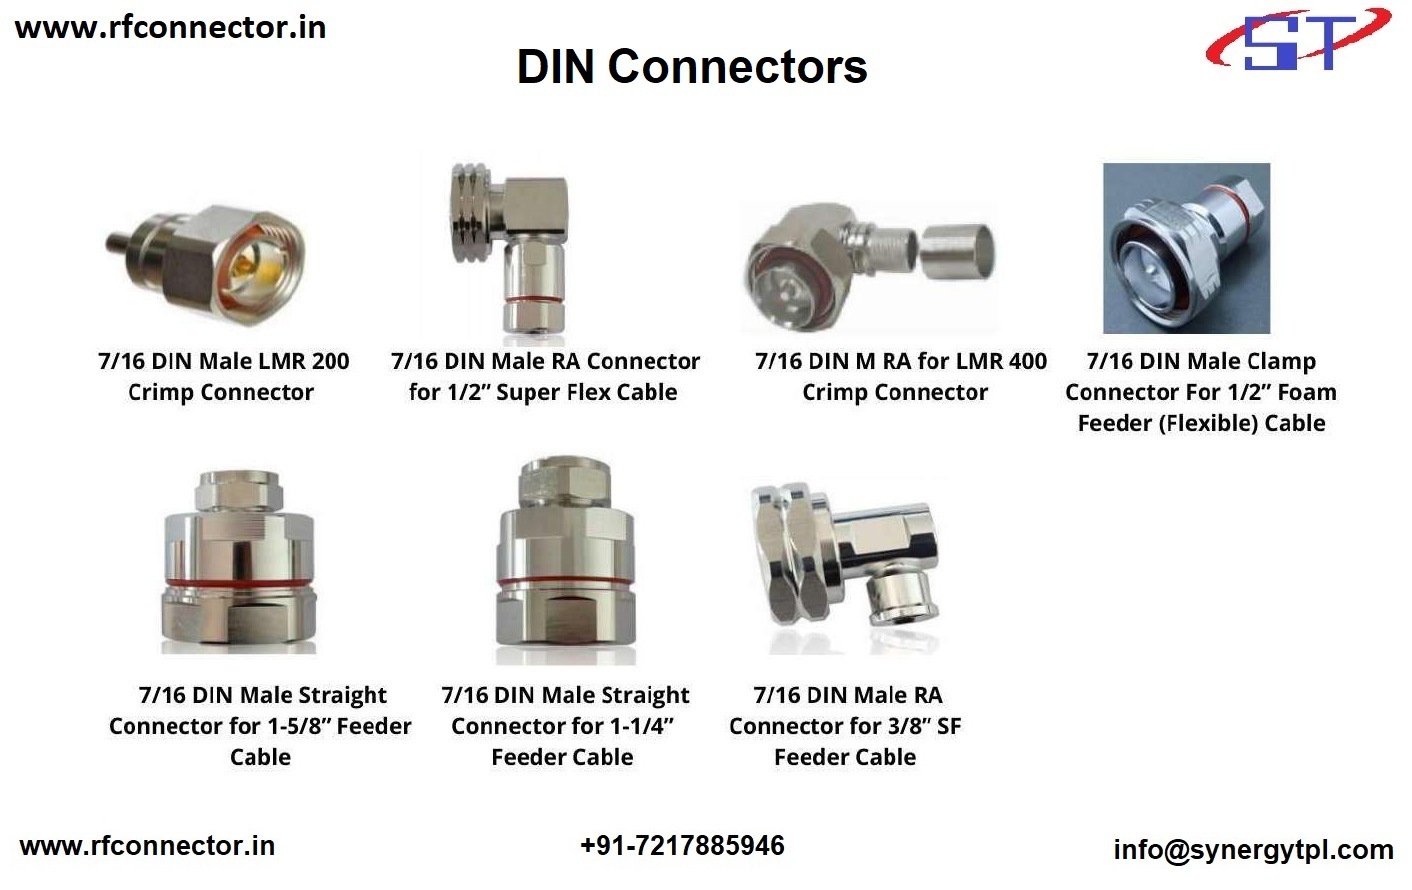 DIN FEMALE 4 HOLE 1-4 CLAMP CONNECTOR